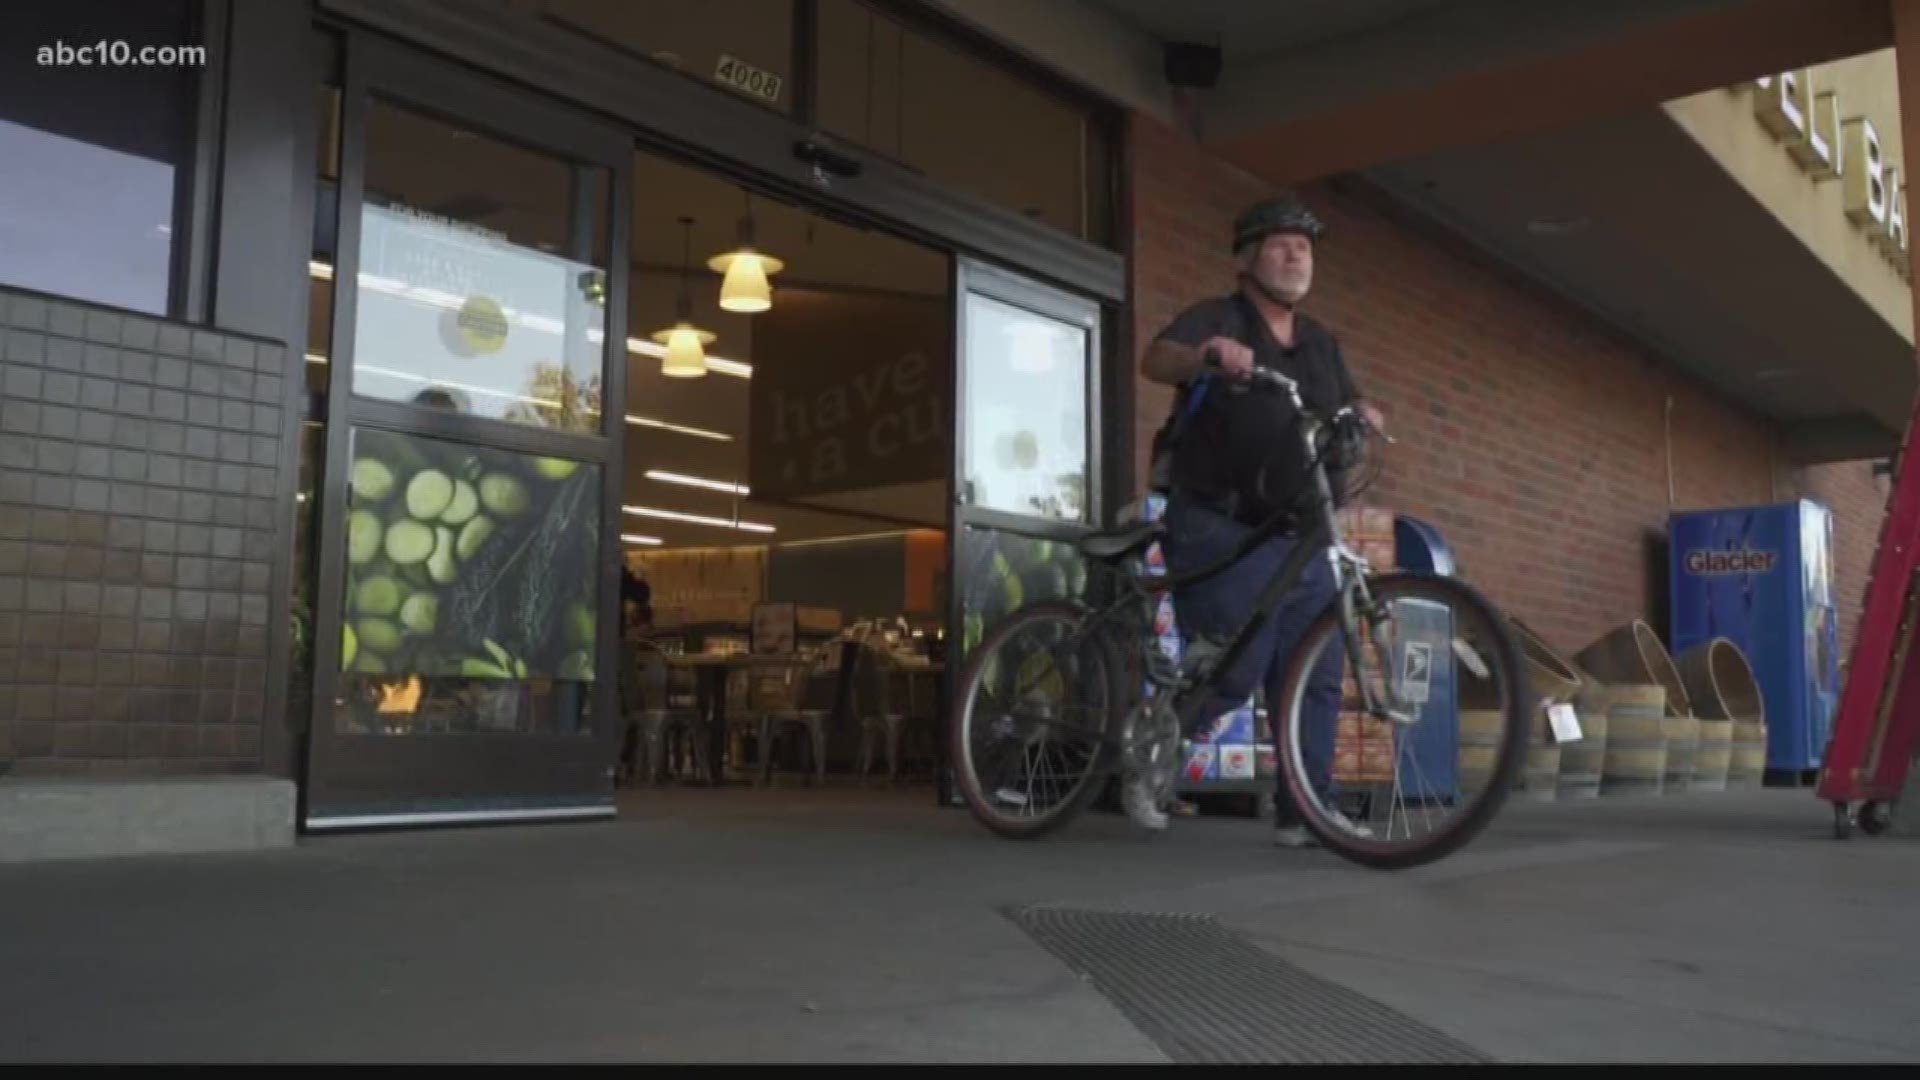 A recent Facebook post from the Roseville Police Department prompted the community of Roseville to step up and help a local grocery store employee.